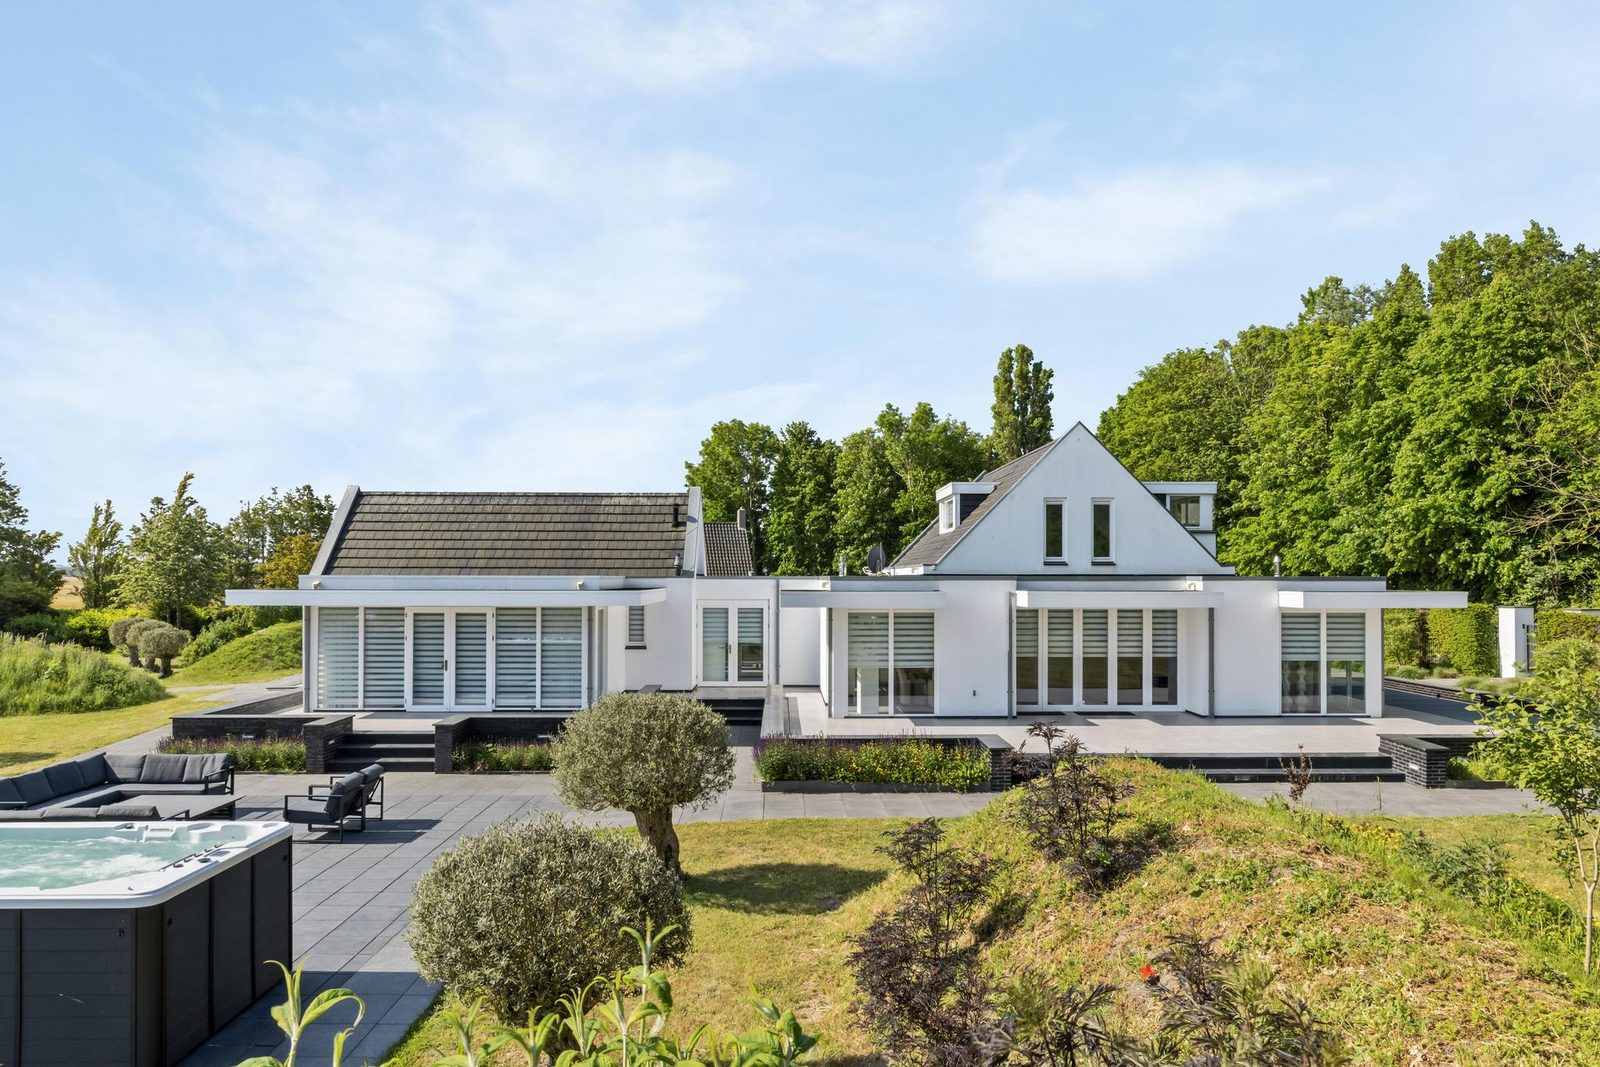 Langedijk 4 - Ouddorp - Minerva (with jacuzzi, extra costs for use)